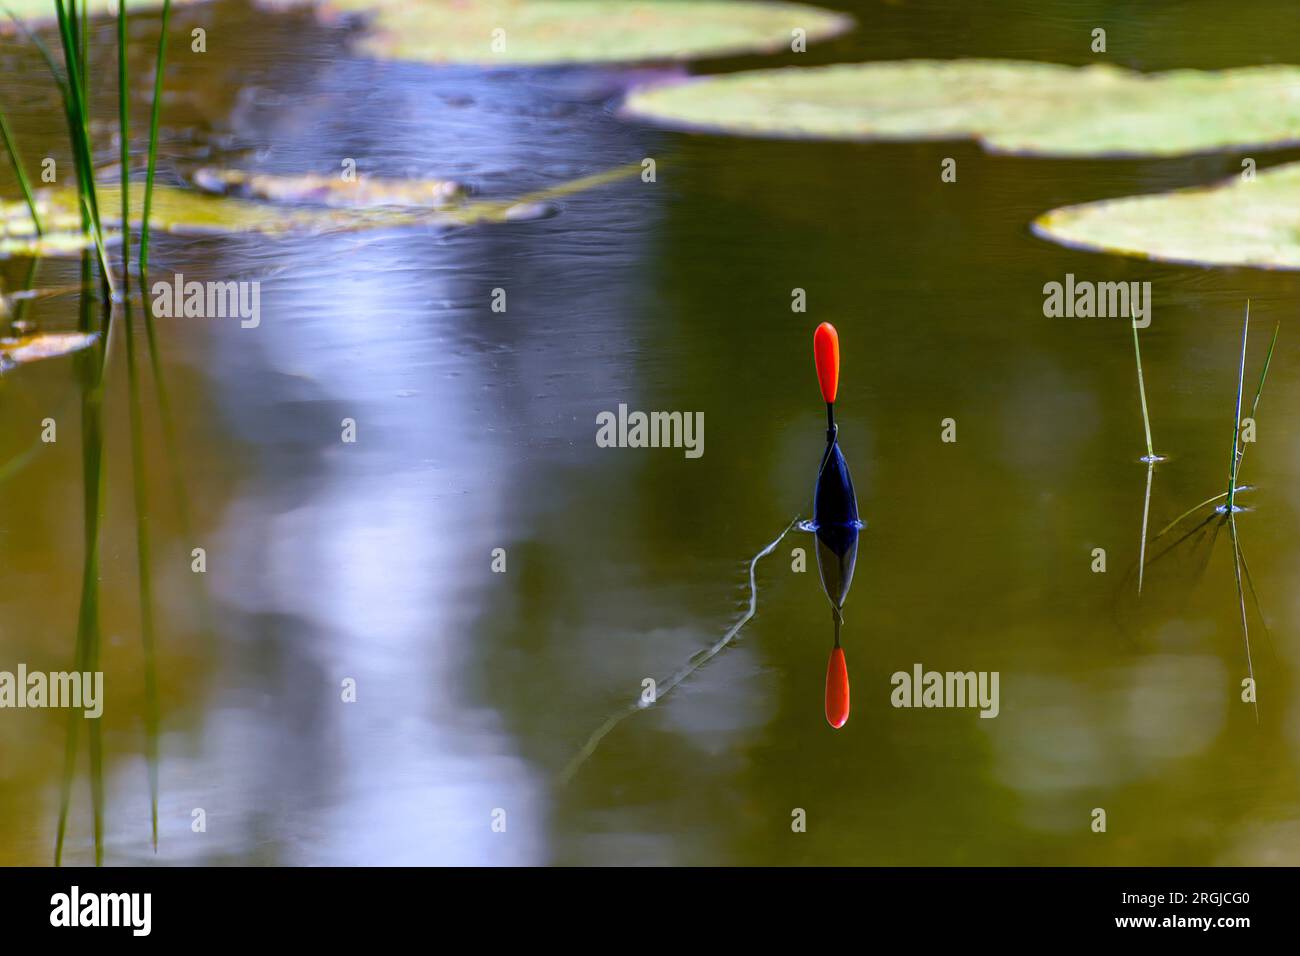 Fishing Bobber Floating in the Small Pond. Fishing Float in the